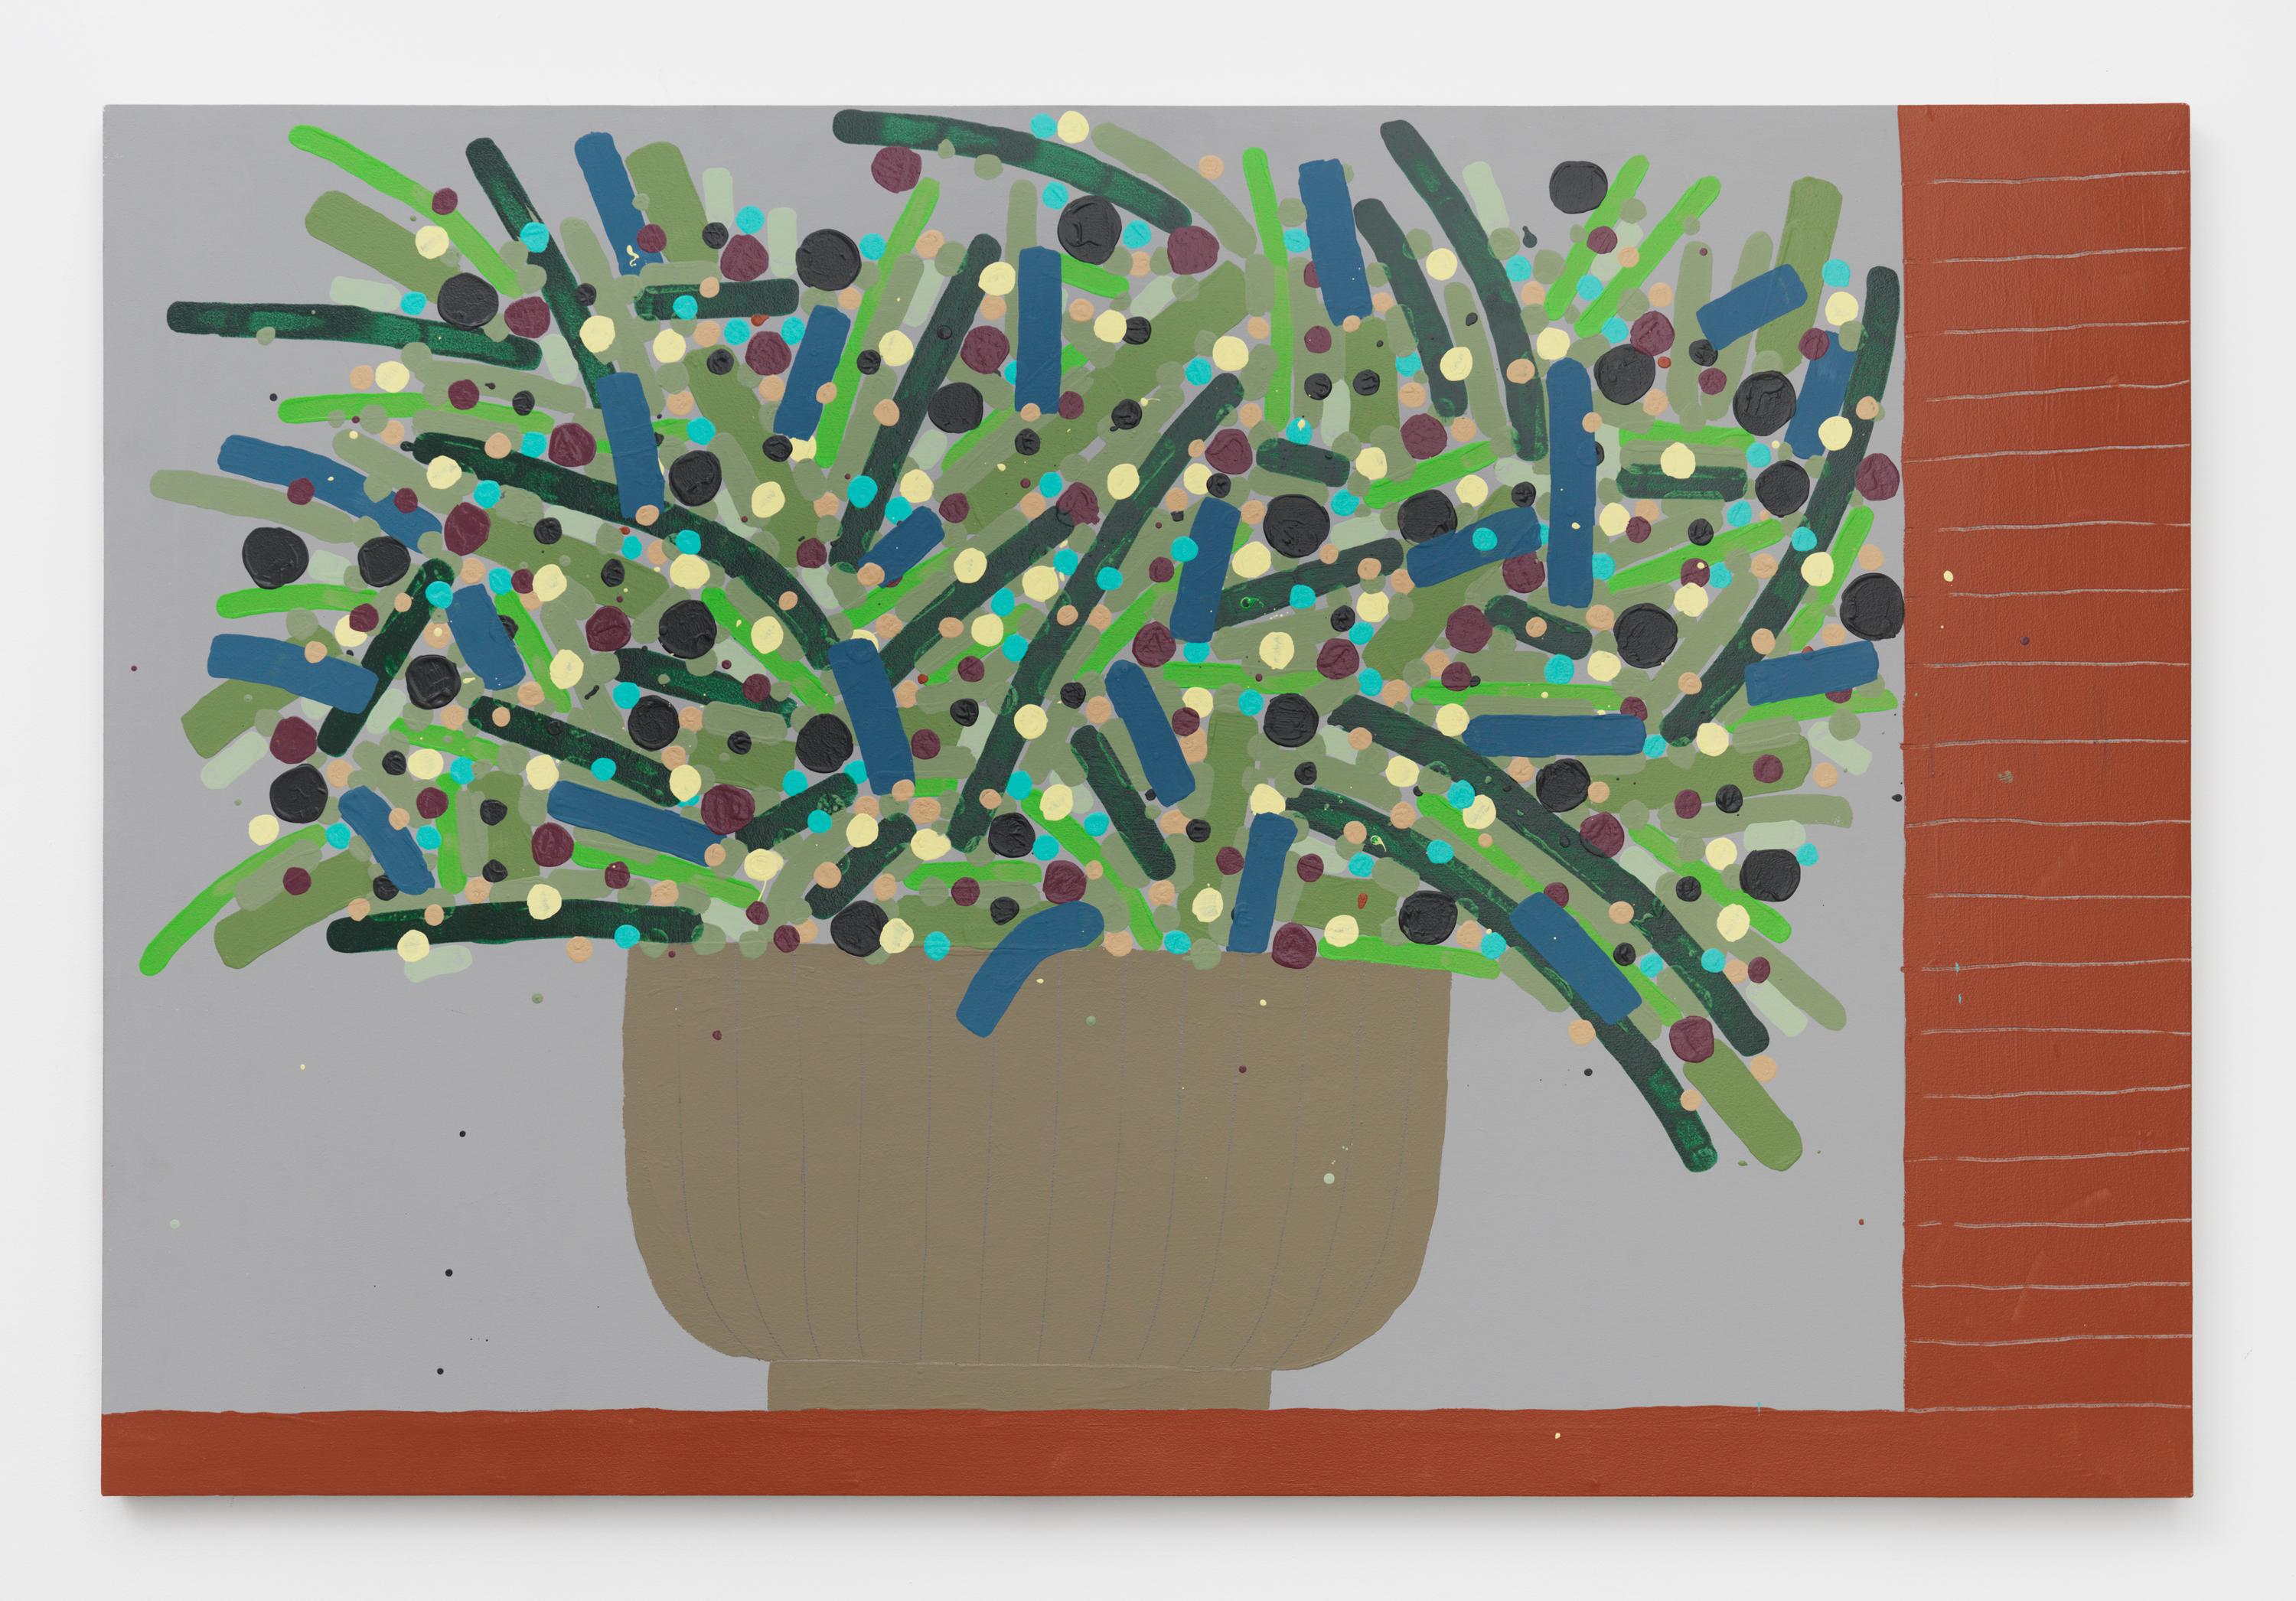 About his flower painting, leading art critic Roberta Smith writes in The New York Times: "Rendered in enamel on wood panel, these hardy works are essentially abstract, itinerant paintings that vibrate with energy. Their simple shapes and